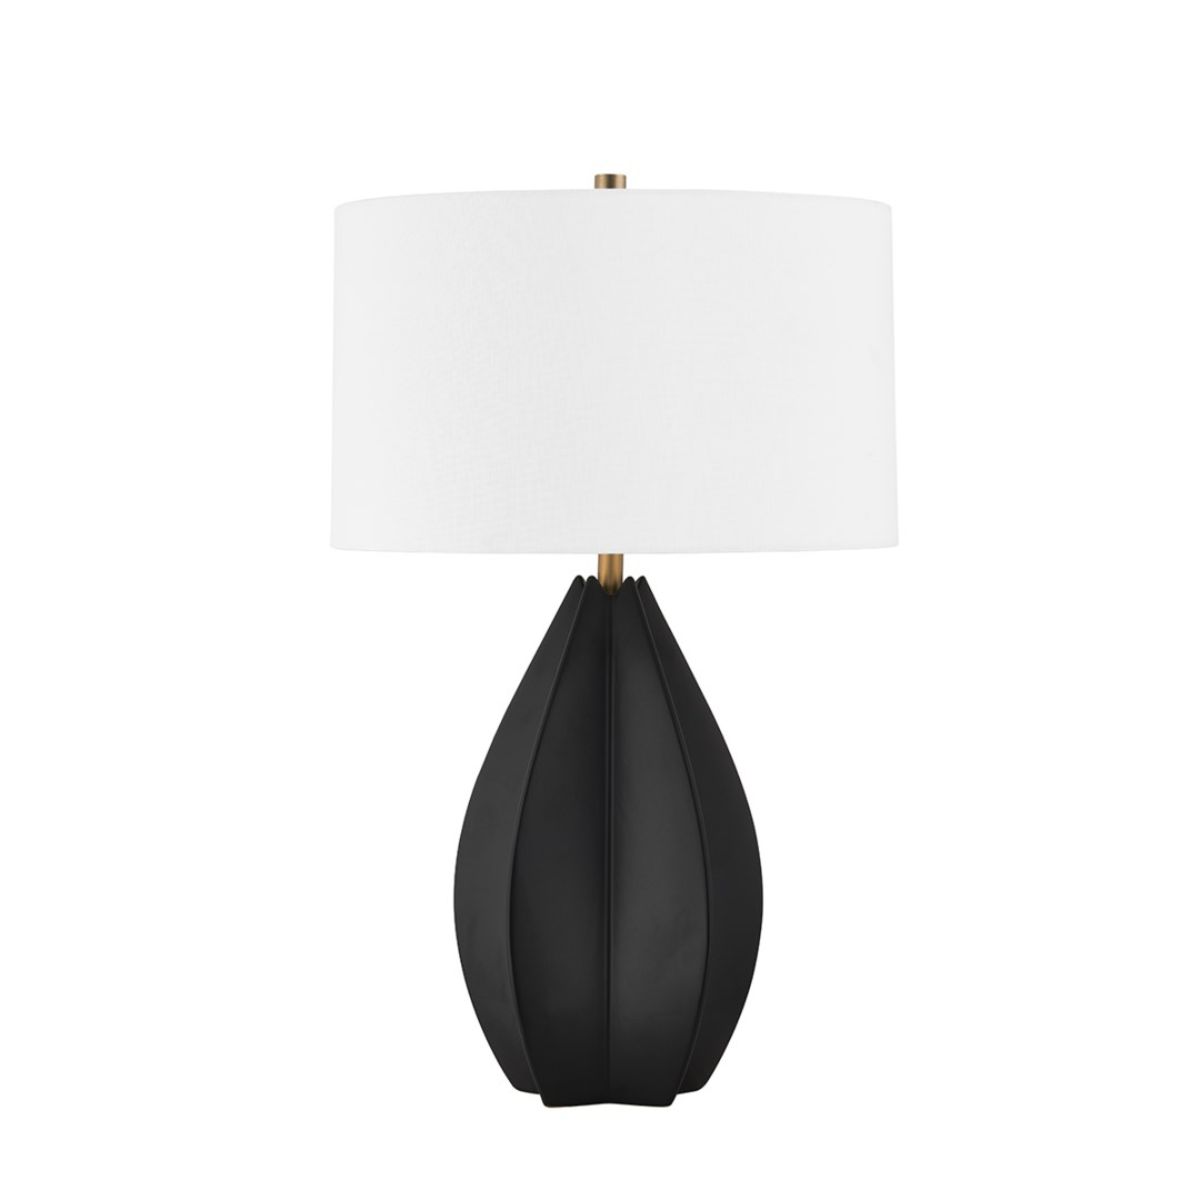 Mineral Table Lamp Ceramic Black Oxide with Patina Brass Accents